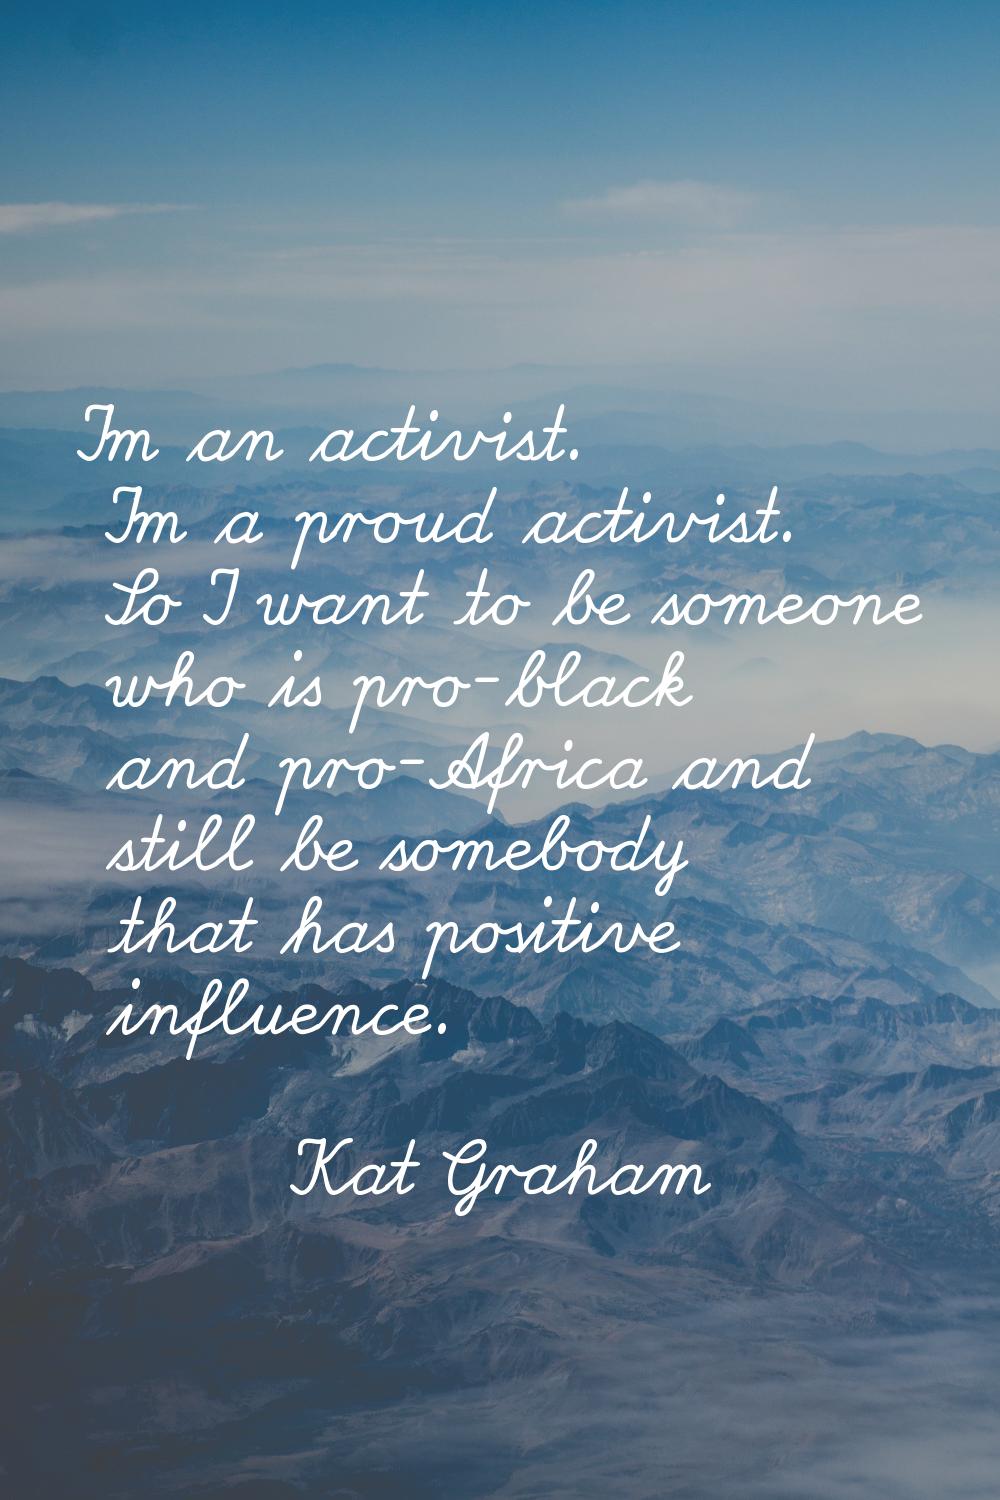 I'm an activist. I'm a proud activist. So I want to be someone who is pro-black and pro-Africa and 